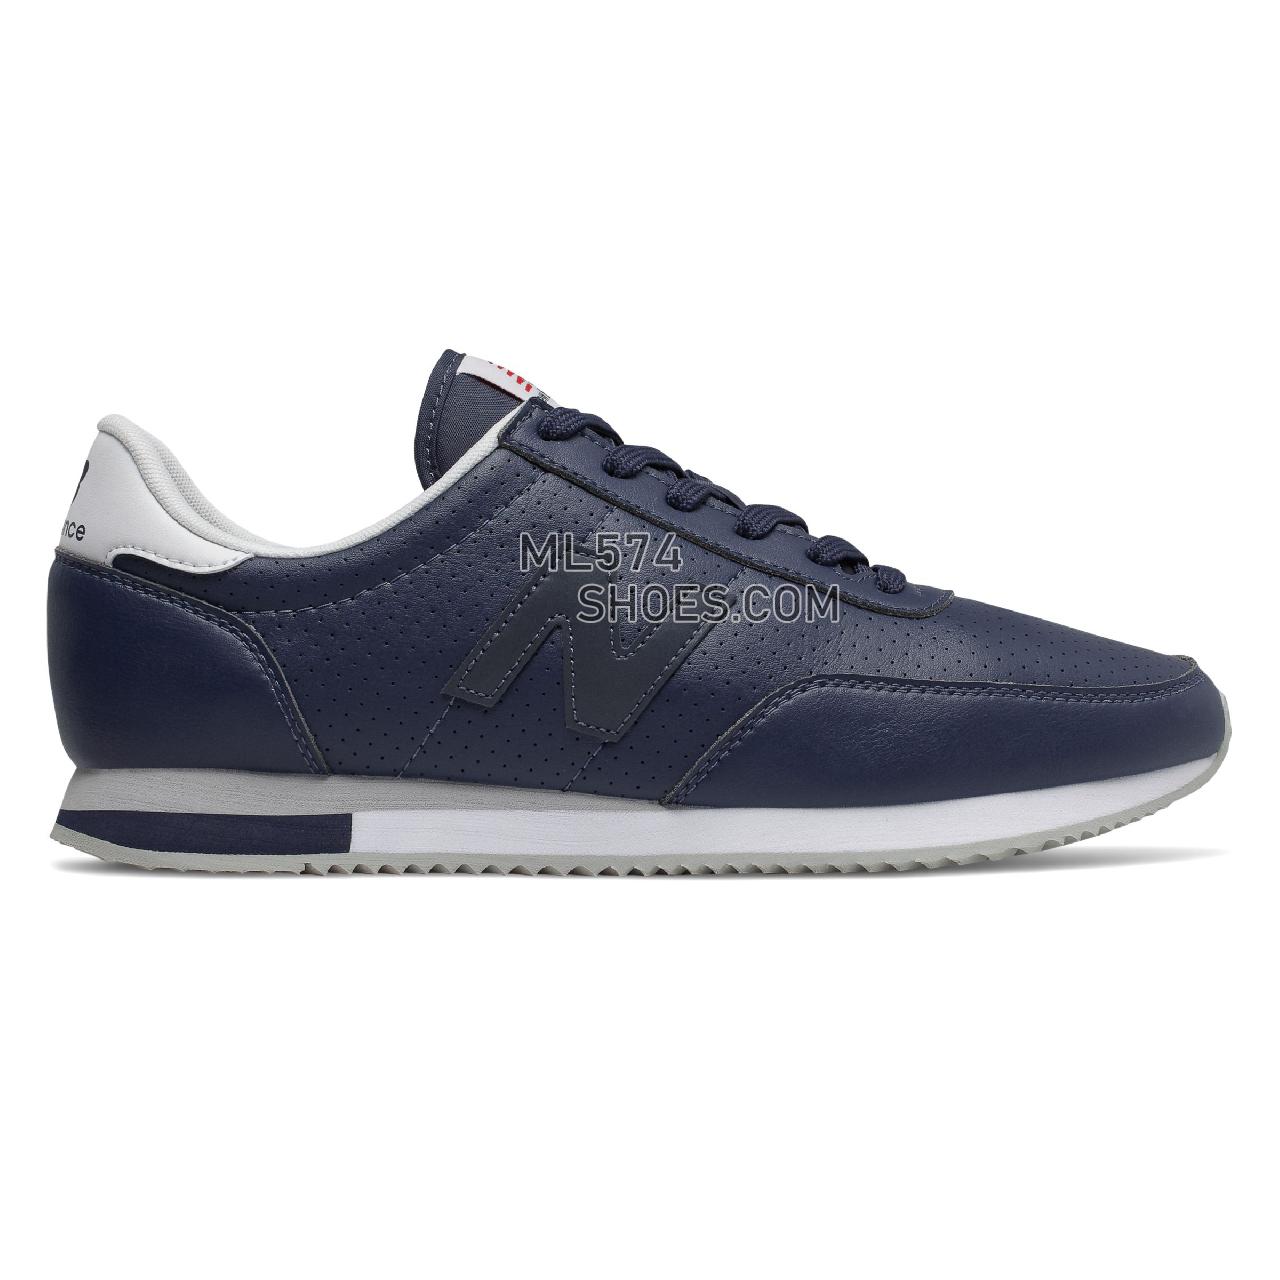 New Balance 720 - Men's Classic Sneakers - Natural Indigo with Gold - UL720CB